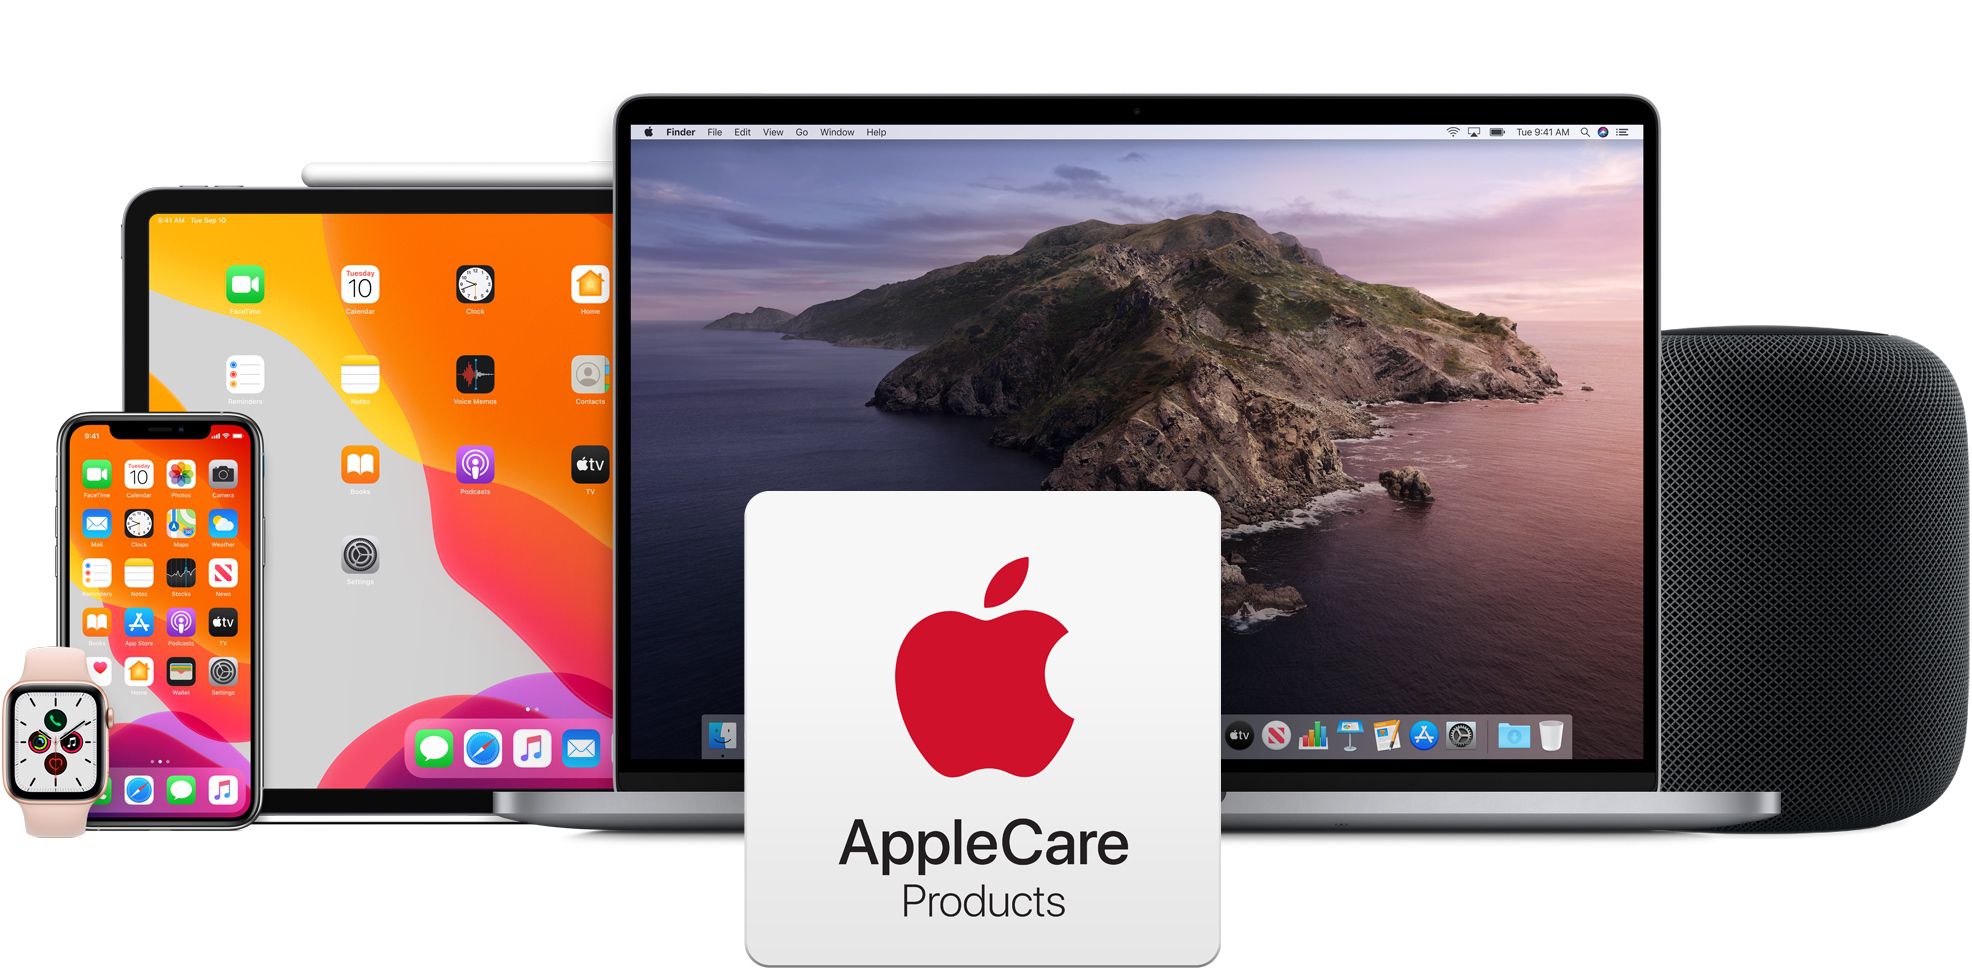 is applecare for macbook worth it